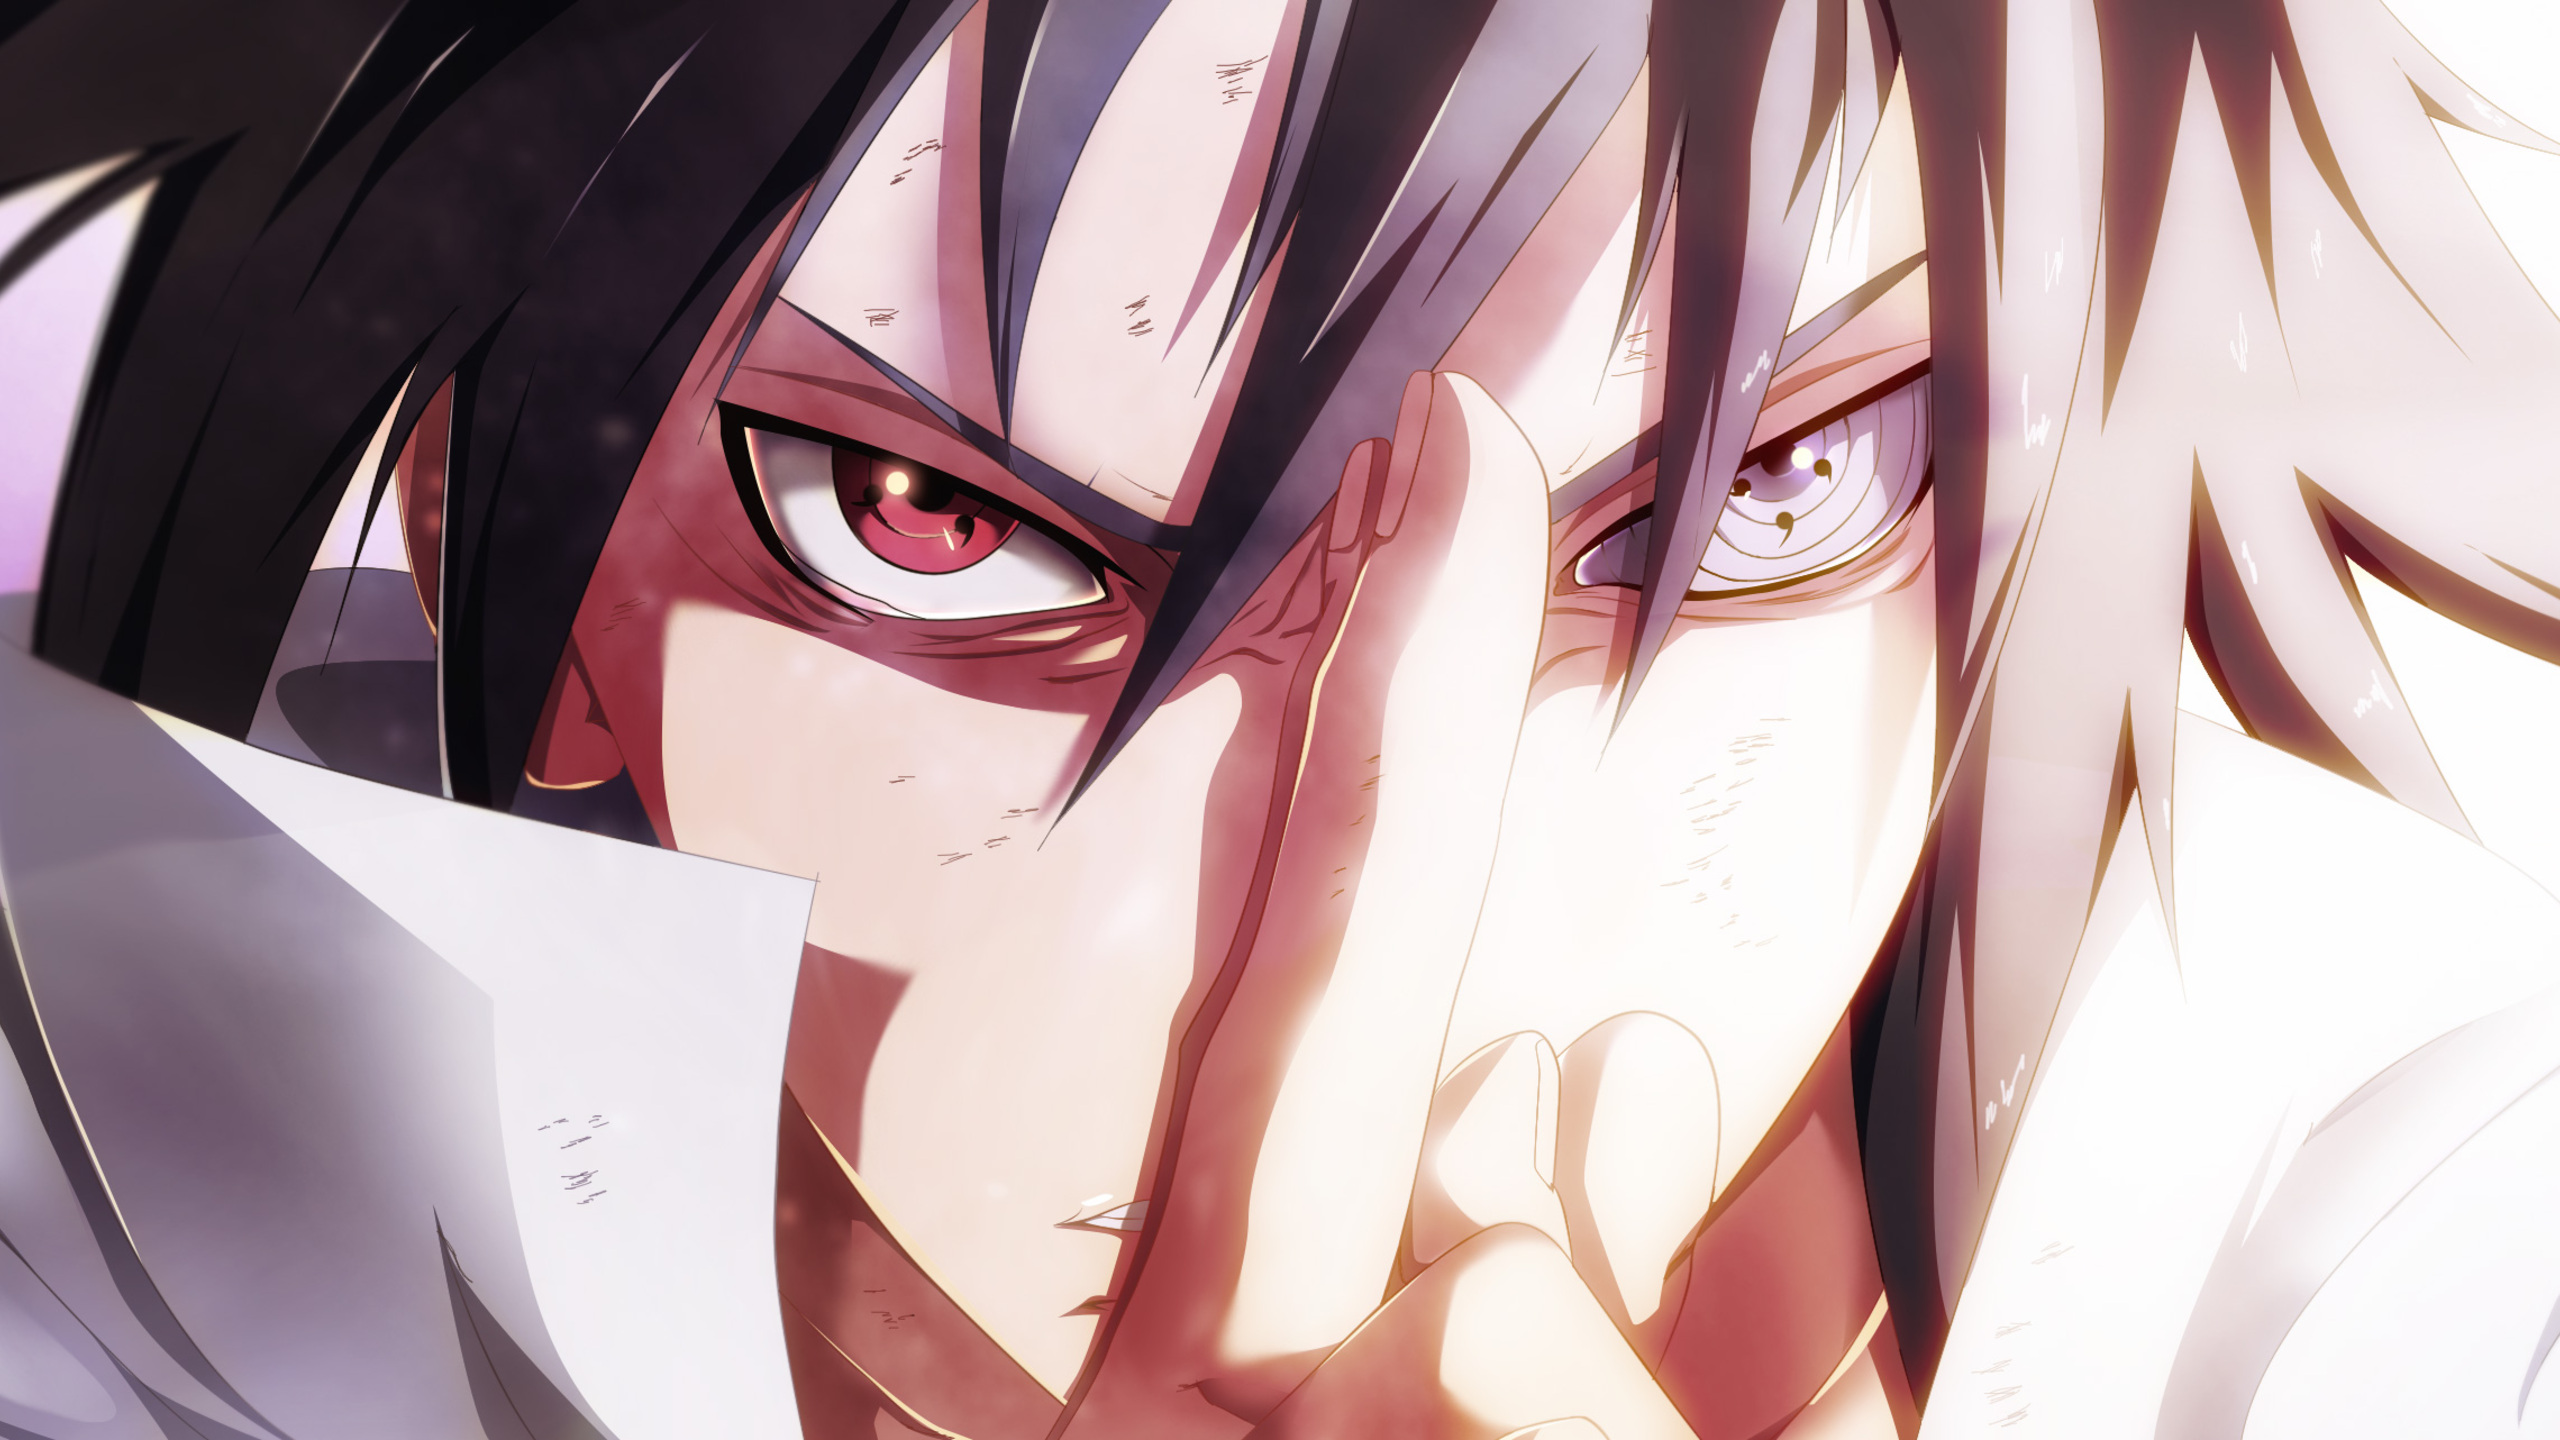 Uchiha 4K wallpaper for your desktop or mobile screen free and easy to download